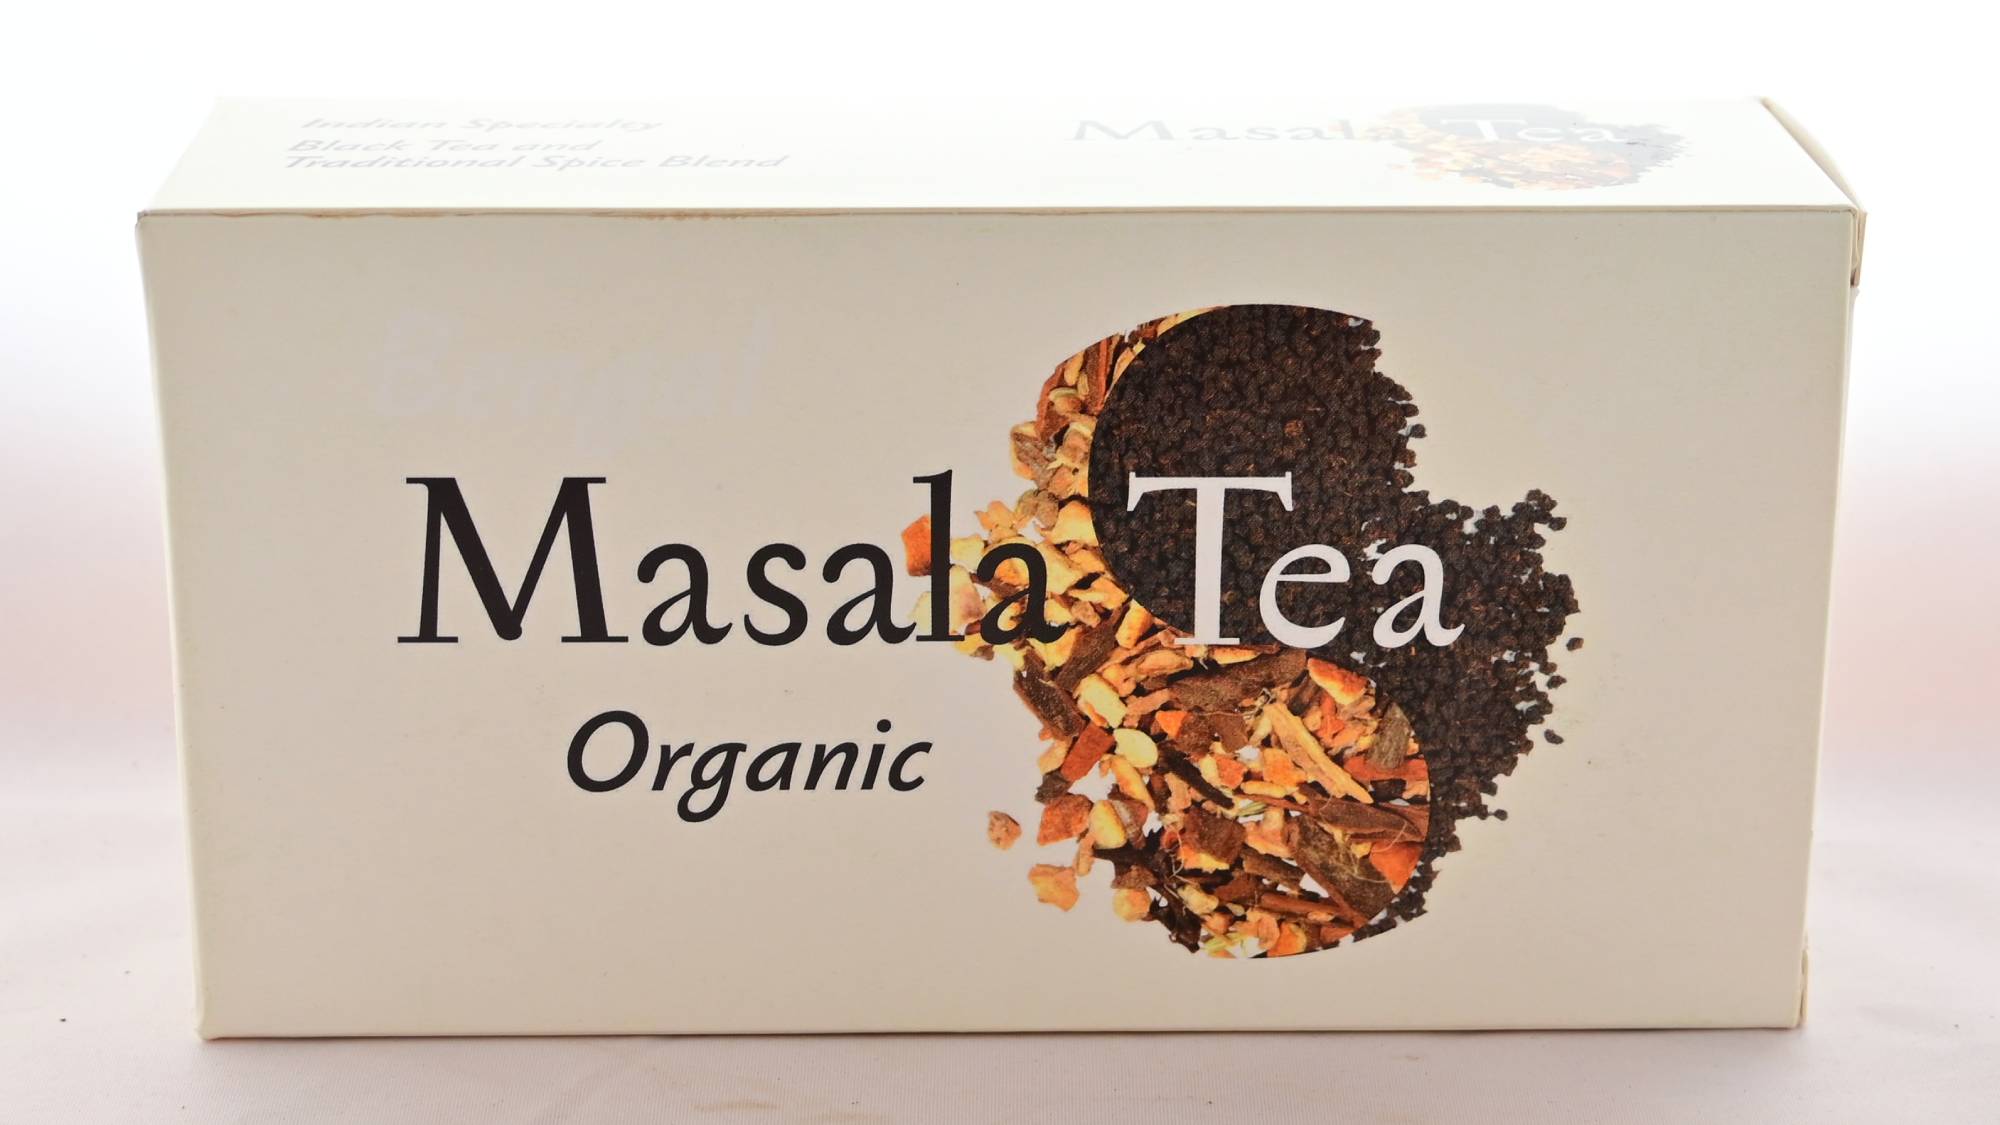 The Organic Masala Tea box is an off-white cream. It features masala spices and rolled black tea together in a yin-yang shape. Text reads: "Masala Tea. Organic."